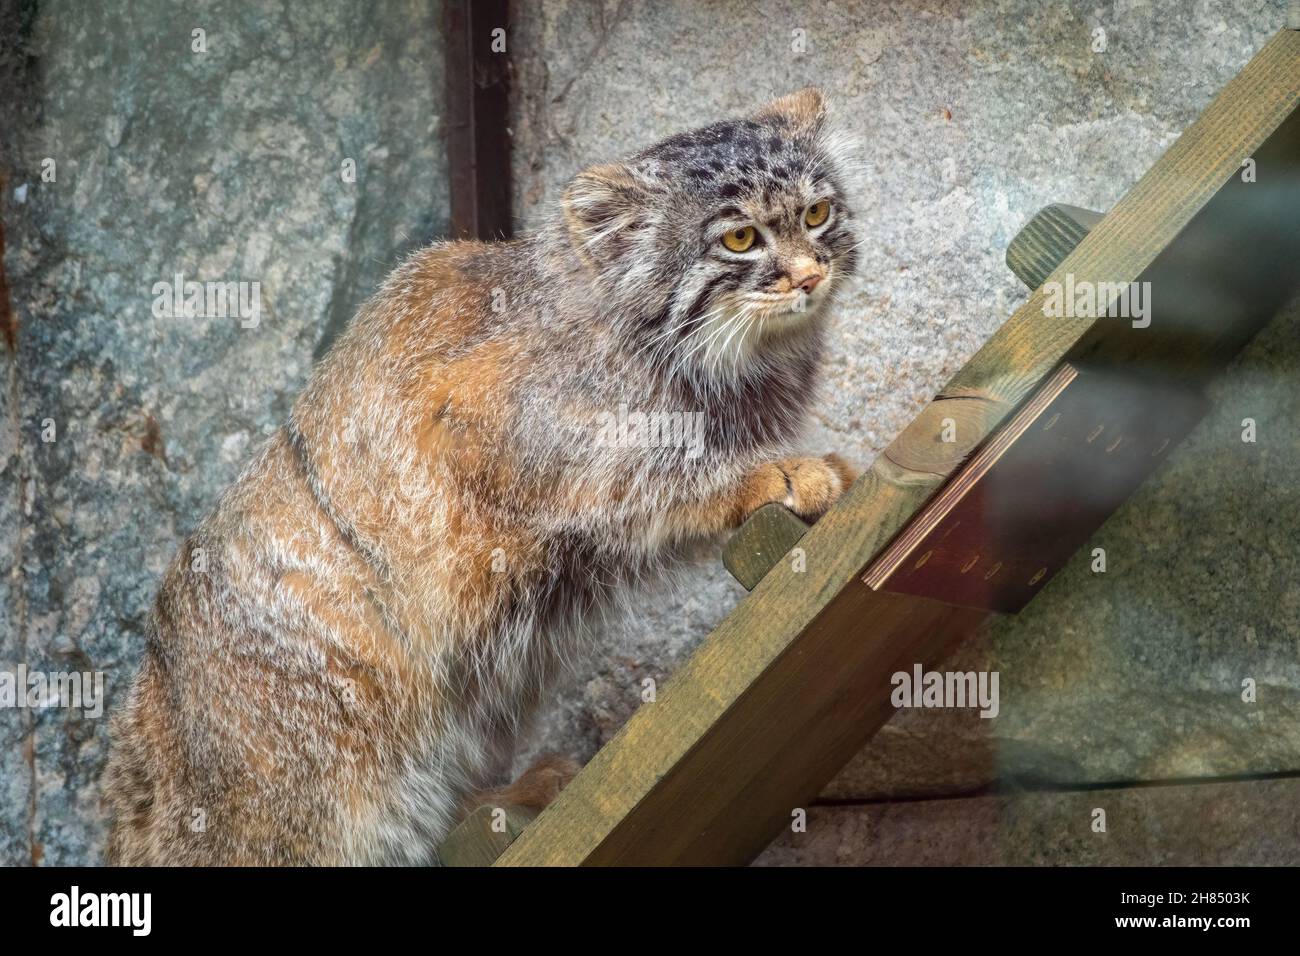 Wild cat manul or Pallas's cat, lat. Otocolobus manul, in the zoo, Manul is a small wild cat with long and dense light grey fur. Stock Photo